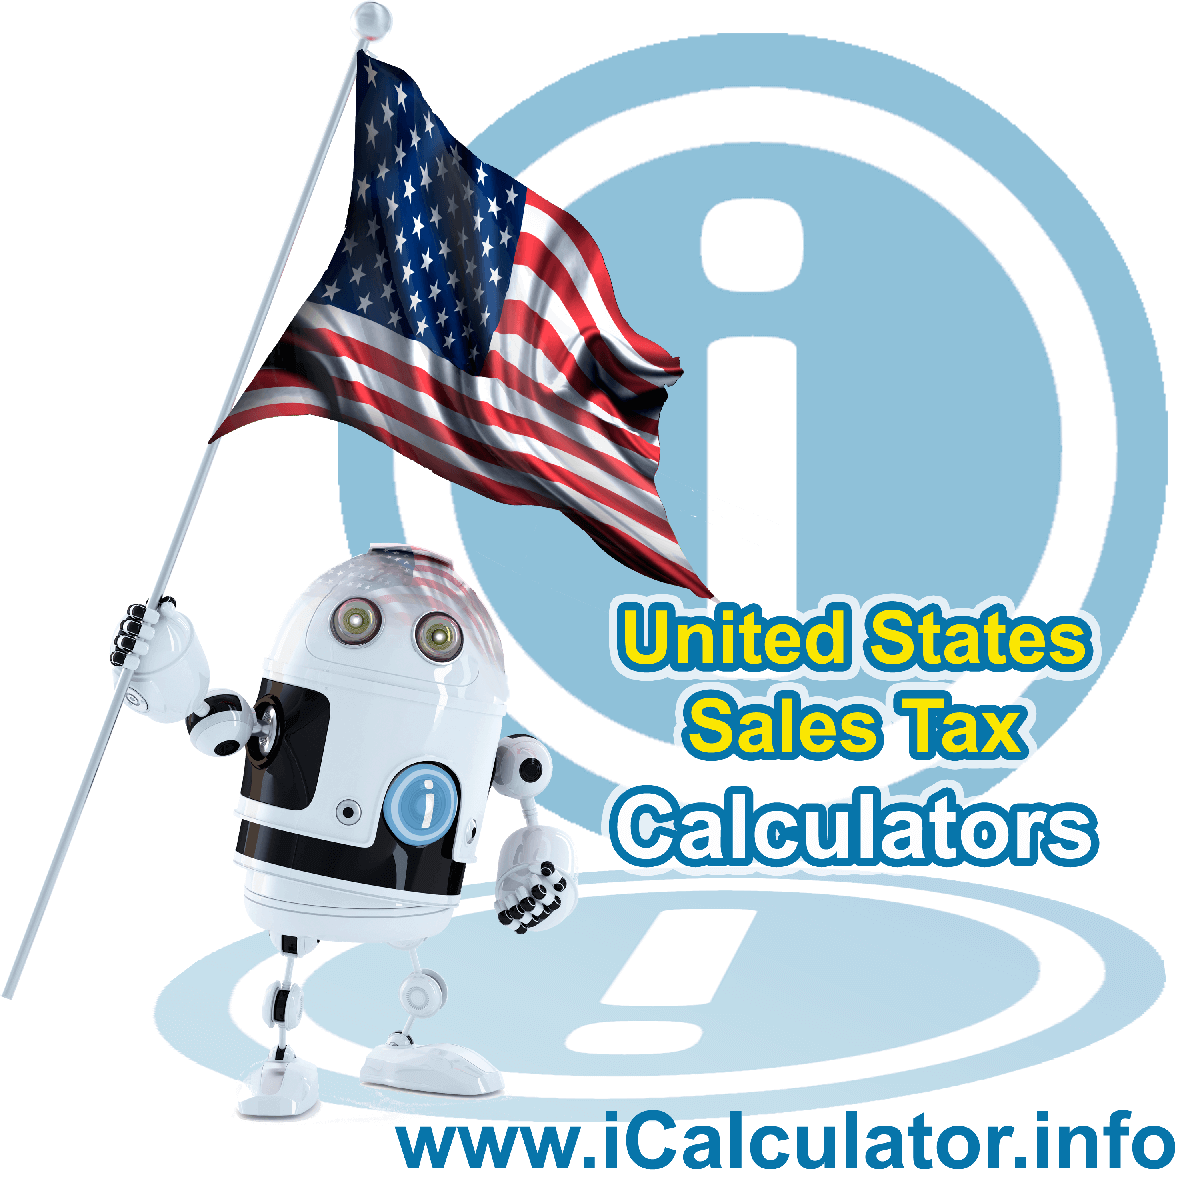 US Sales Tax Comparison Calculator: This image illustrates a calculator robot comparing sales tax in the United States manually using the United States Sales Tax Formula. You can use this information to compare Sales Tax manually or use the United States Sales Tax Comparison Calculator to calculate and compare sales tax online.